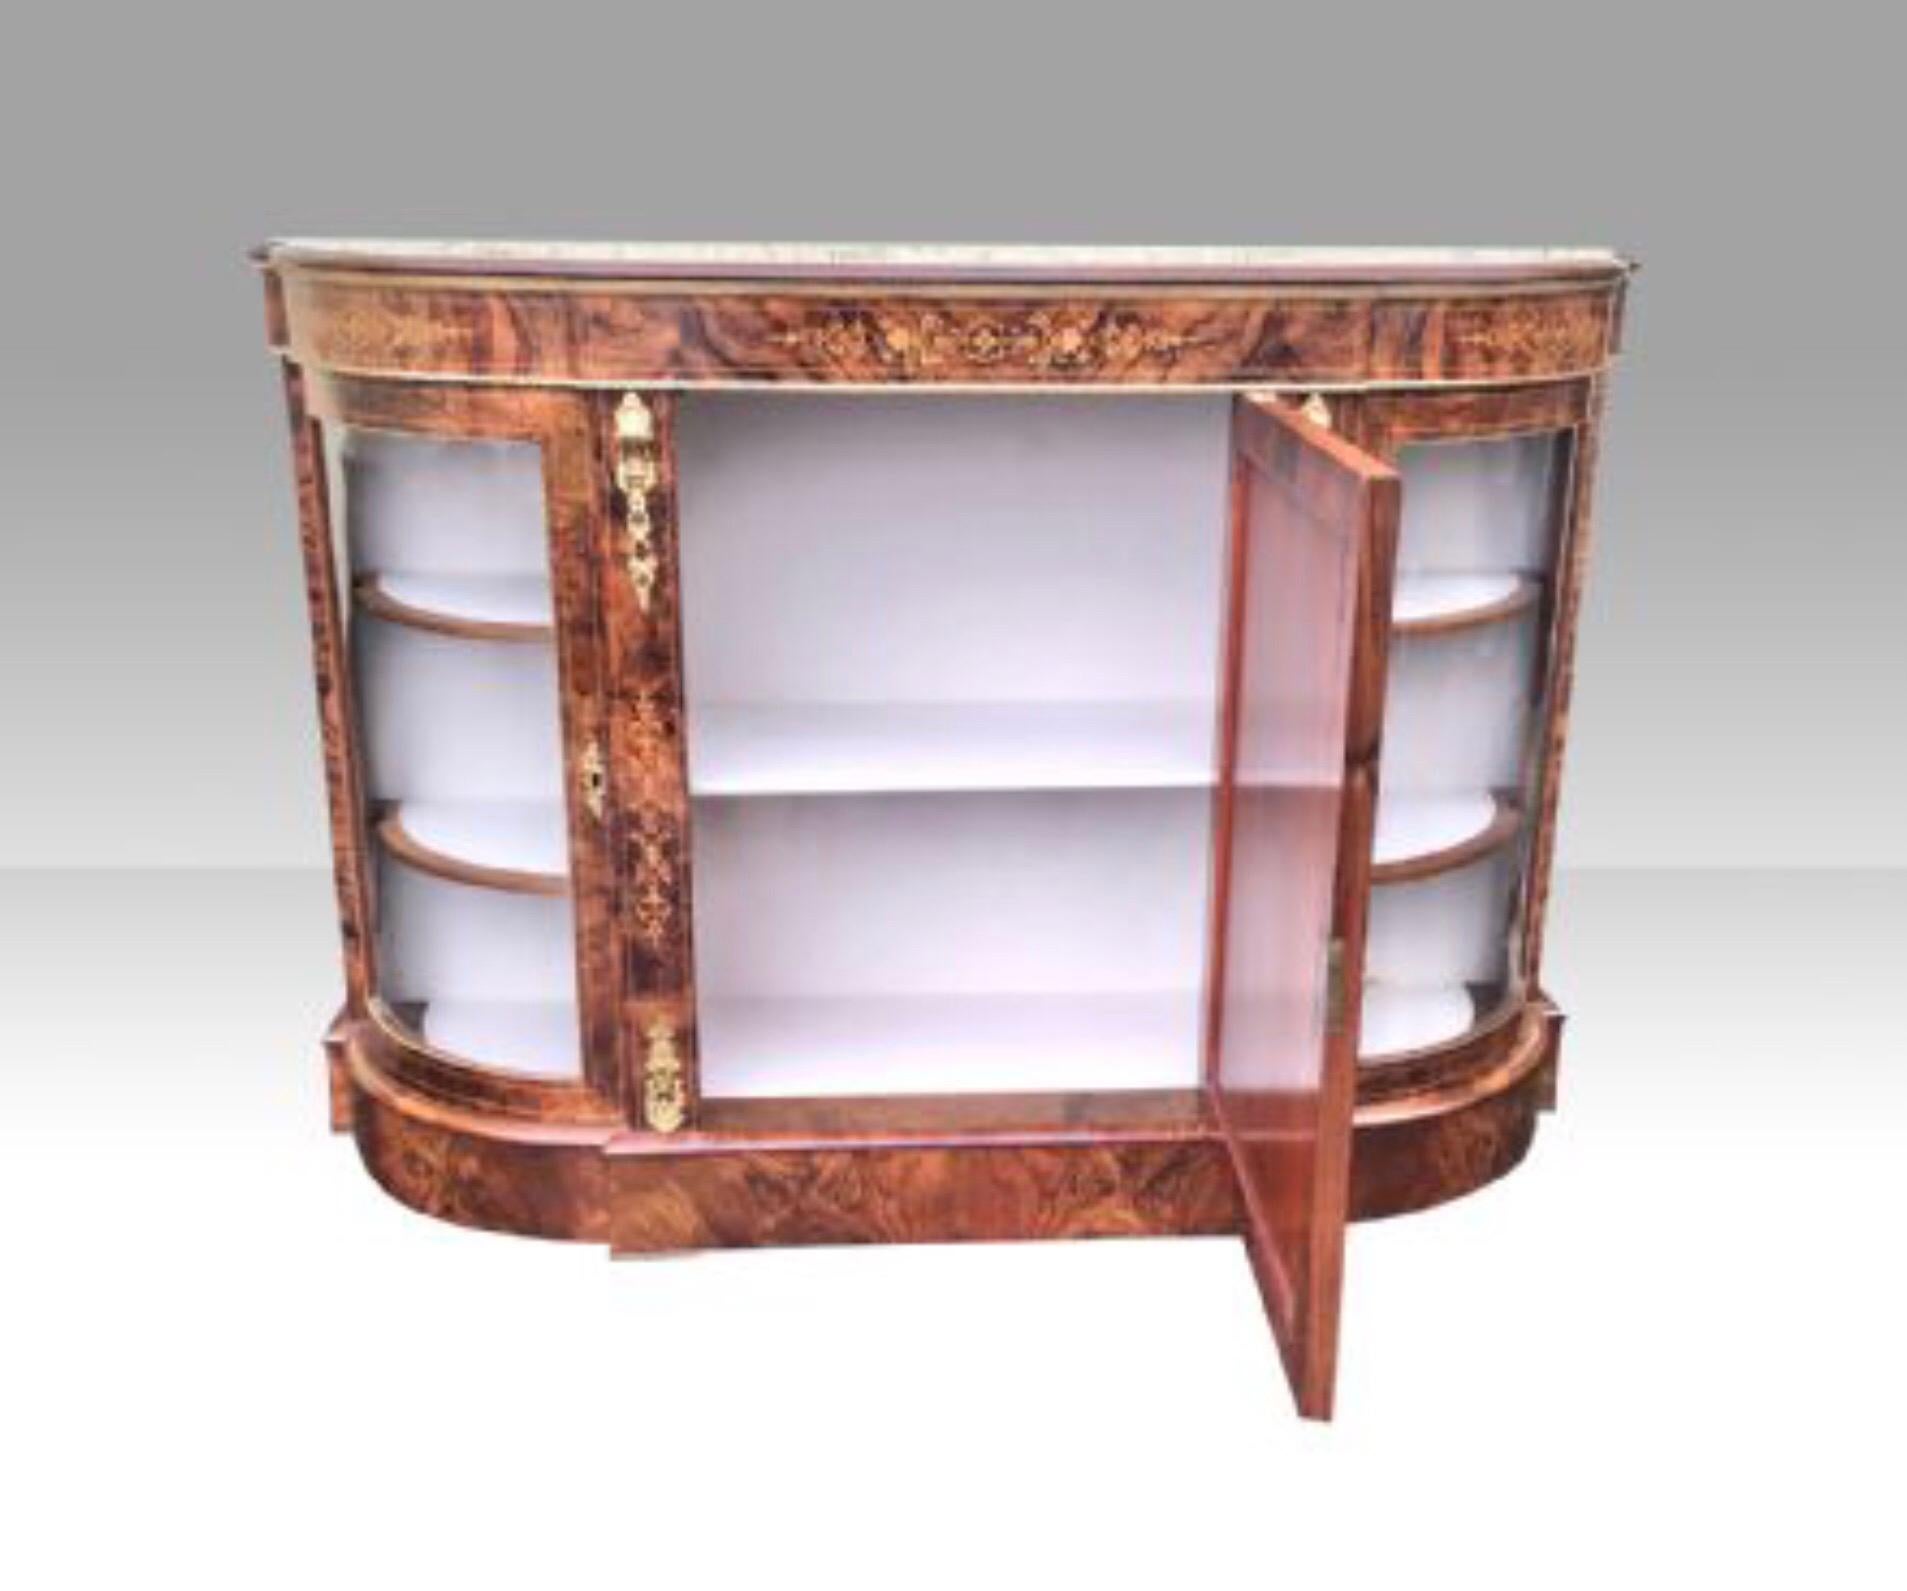 Victorian Antique Burr Walnut and Gilt Ormolu Mounted Antique Credenza Cabinet Sideboard For Sale